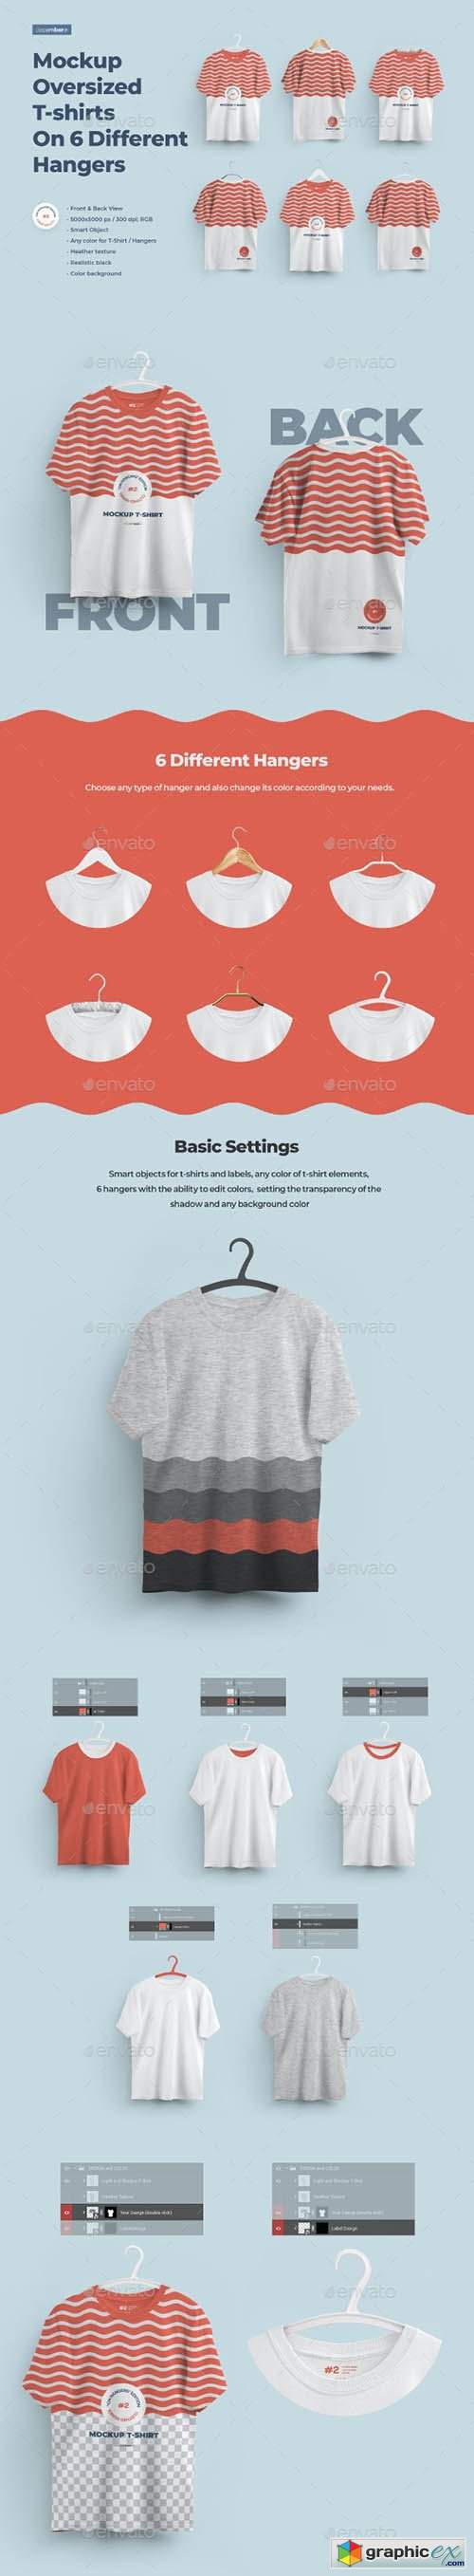 2 Mockups Oversized T-shirts On 6 Different Hangers 